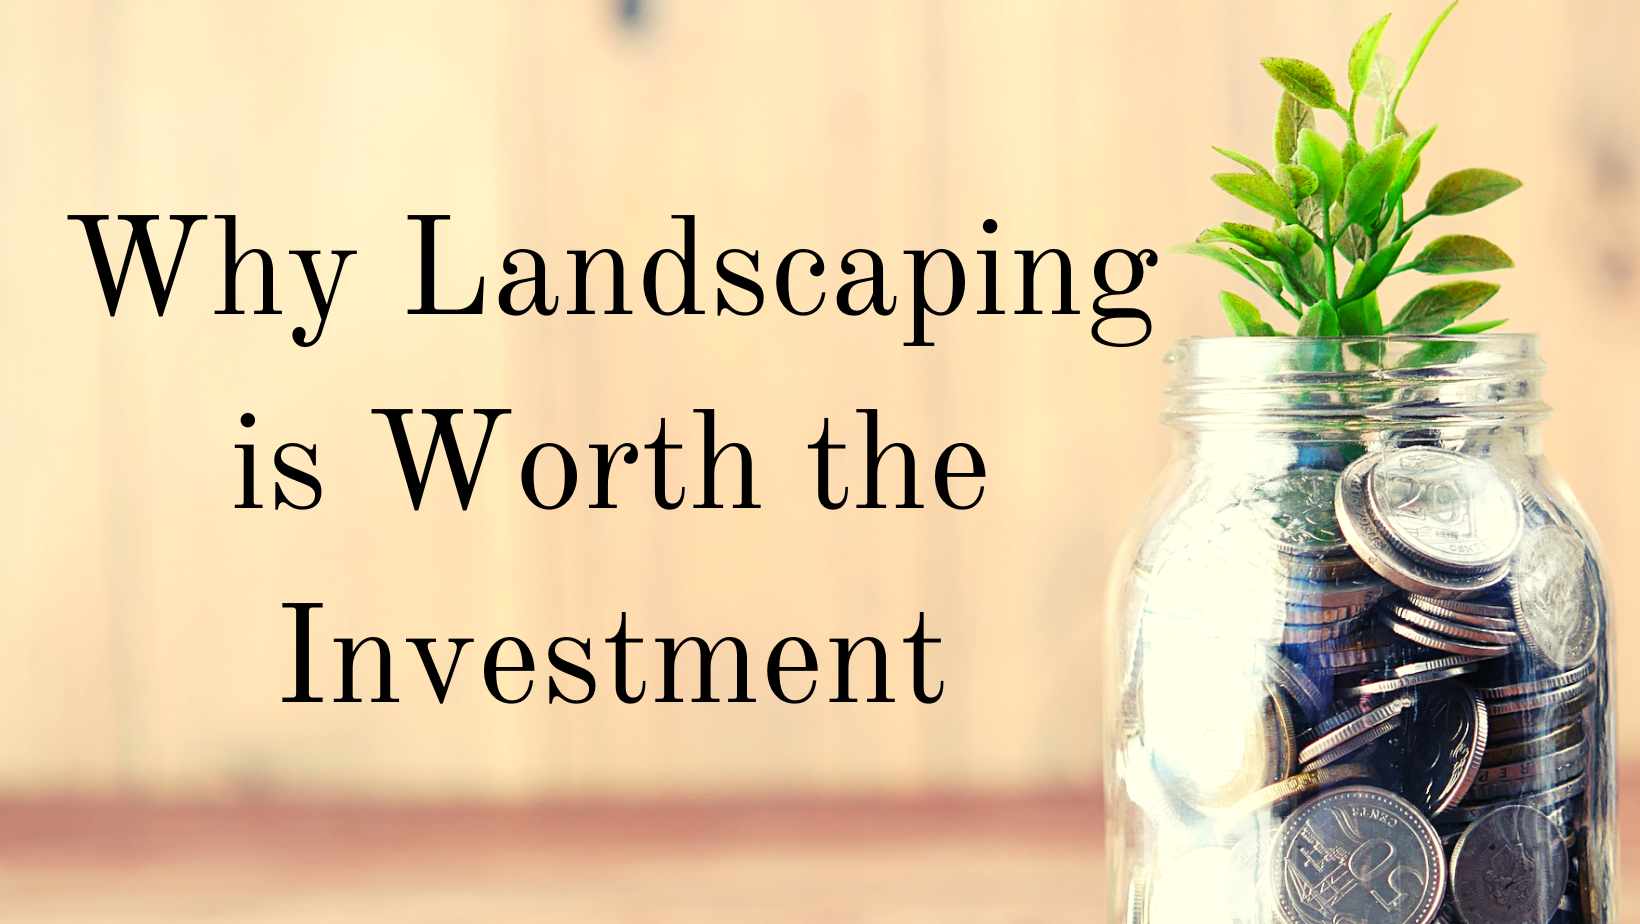 An image of a jar of coins with a plant growing out of it and the text: Why Landscaping is Worth the Investment.